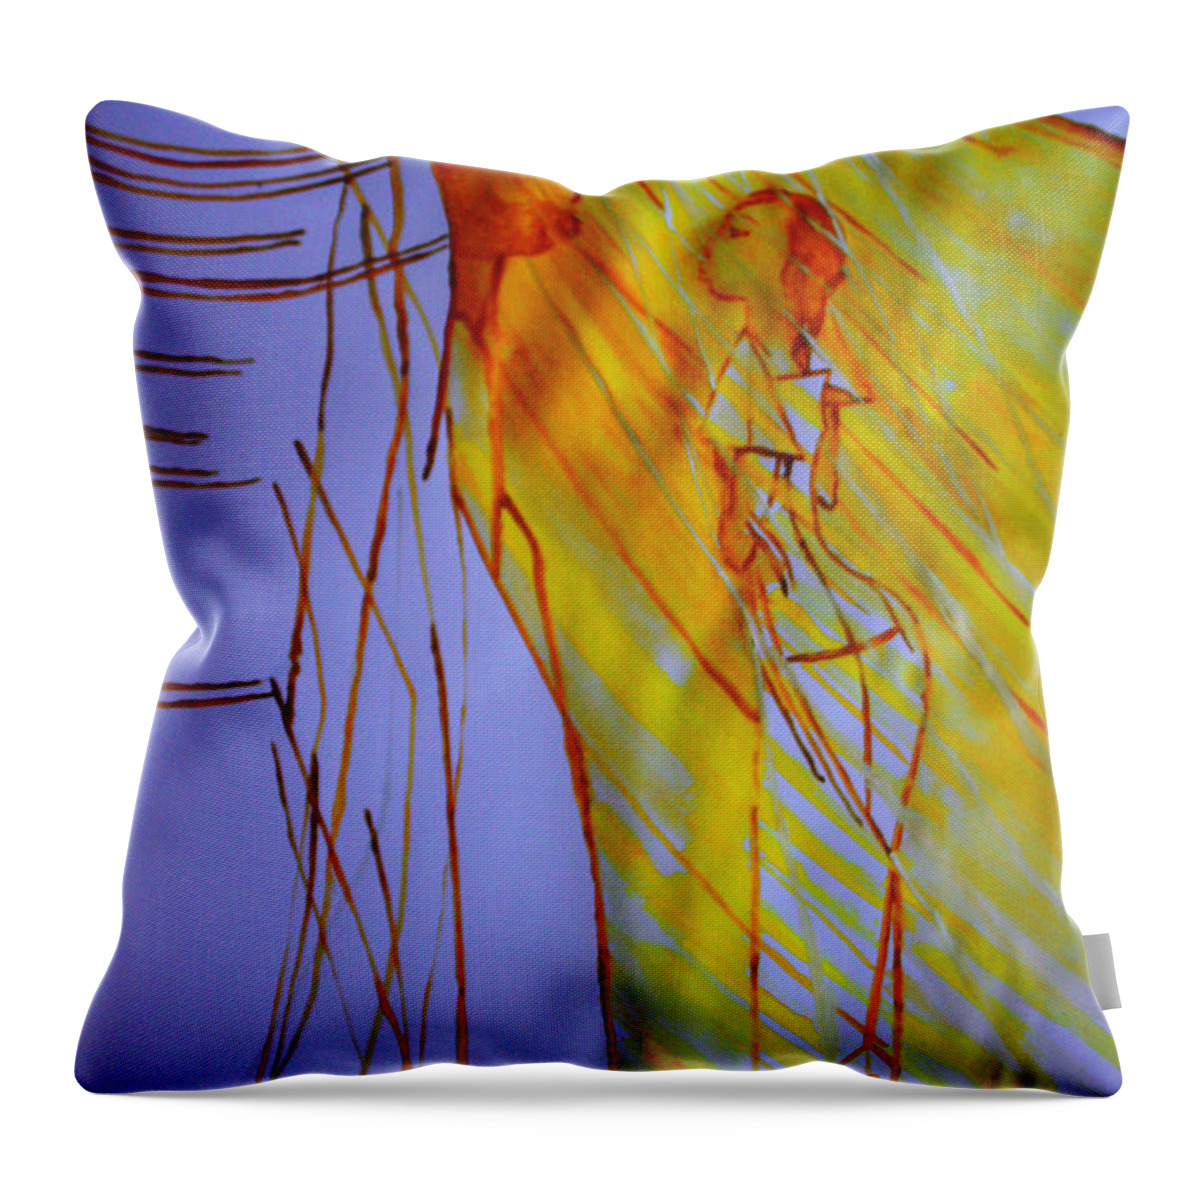 Jesus Throw Pillow featuring the painting The Annunciation #16 by Gloria Ssali